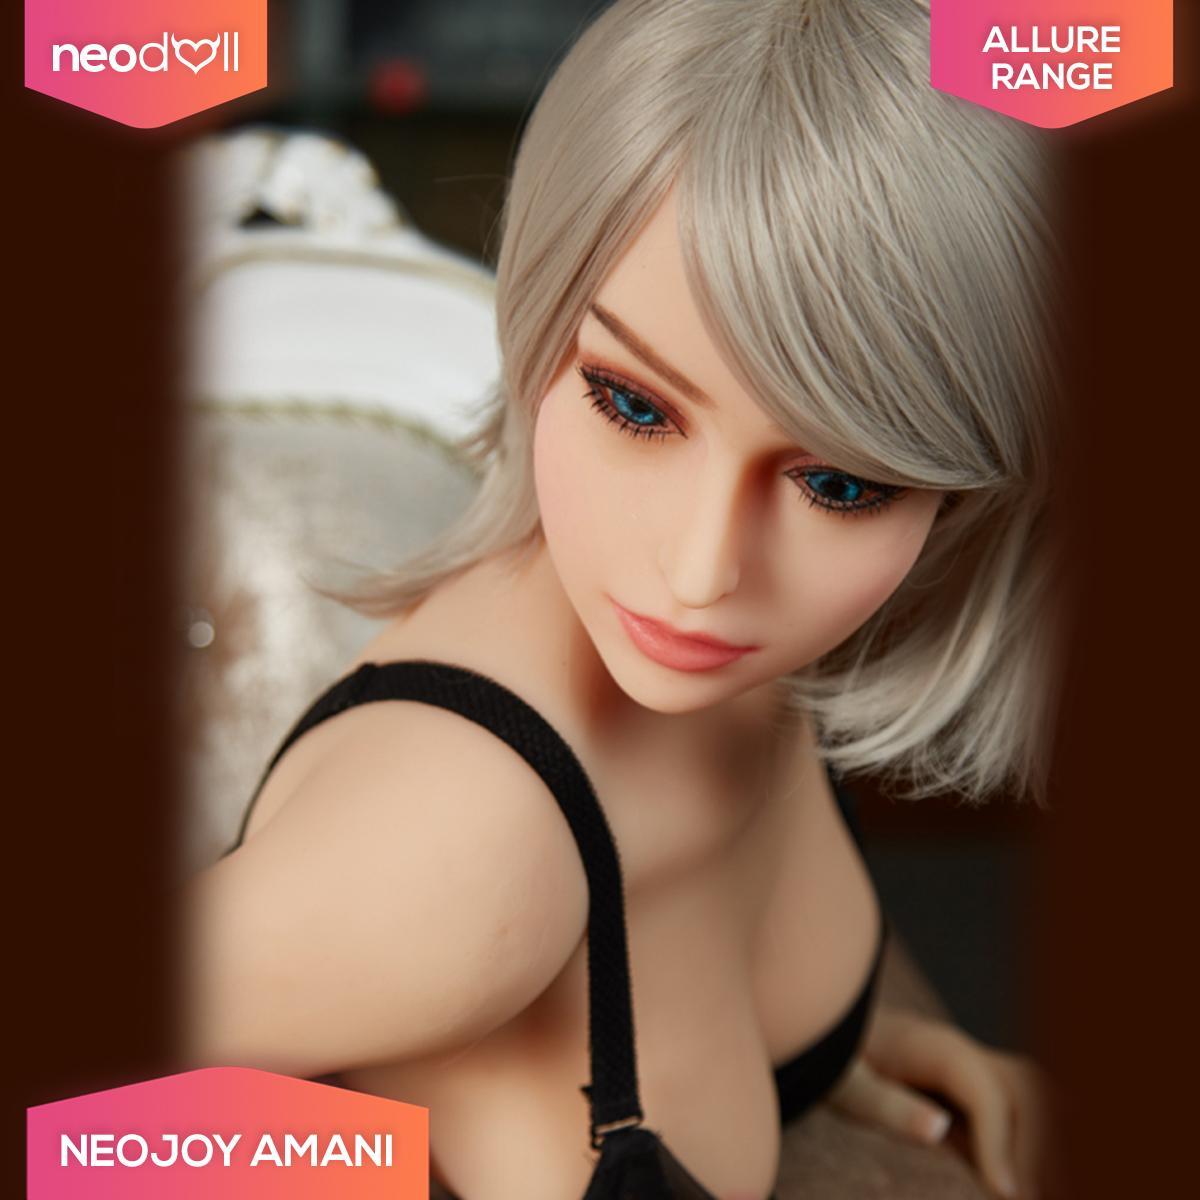 Sex Doll Amani | 169cm Height | Natural Skin | Standing | Neodoll Allure